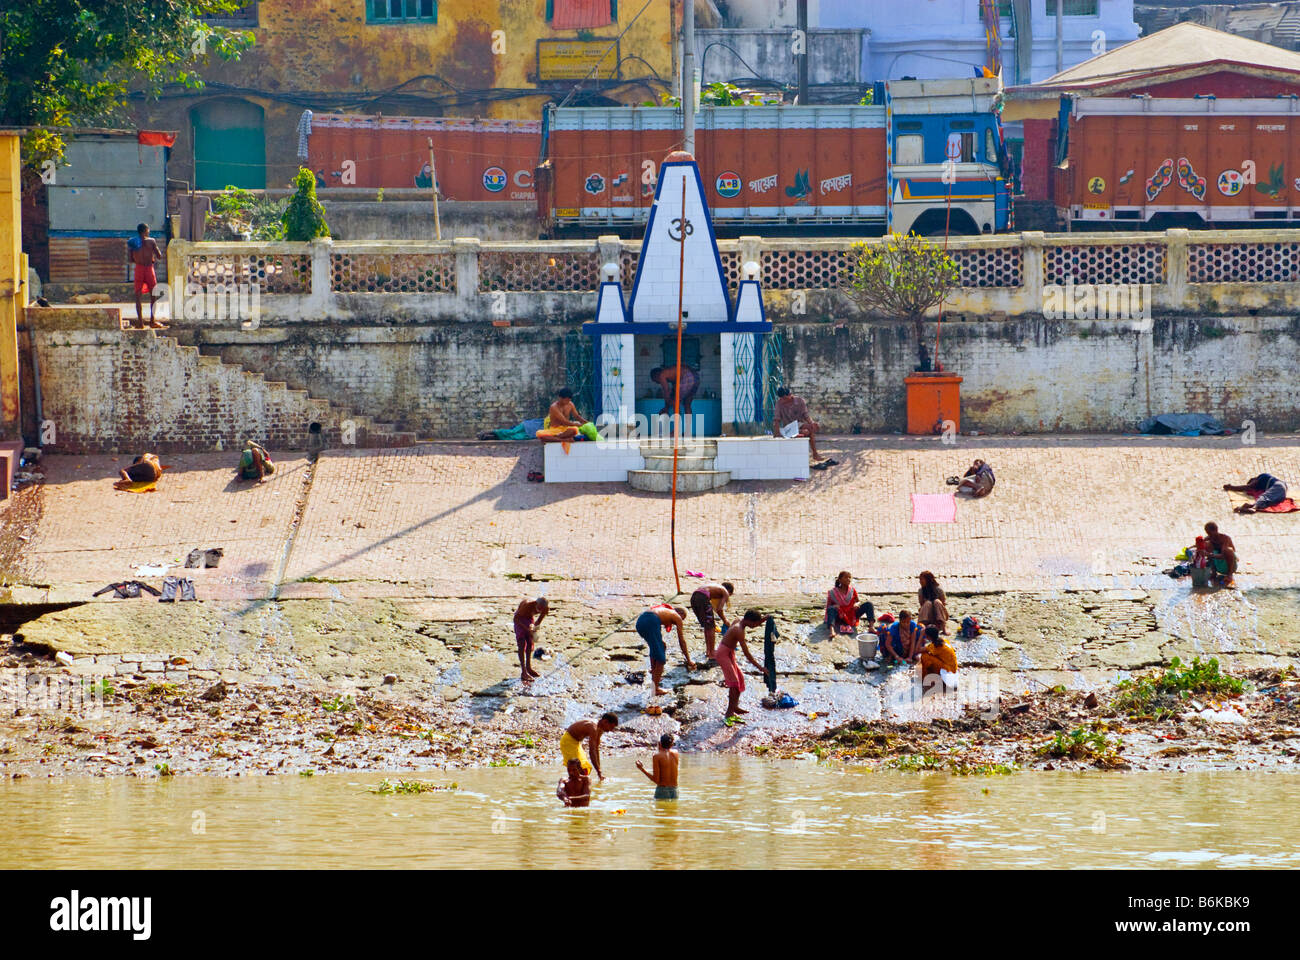 Bathing Ghat on the Hooghly River in Kolkata, India Stock Photo